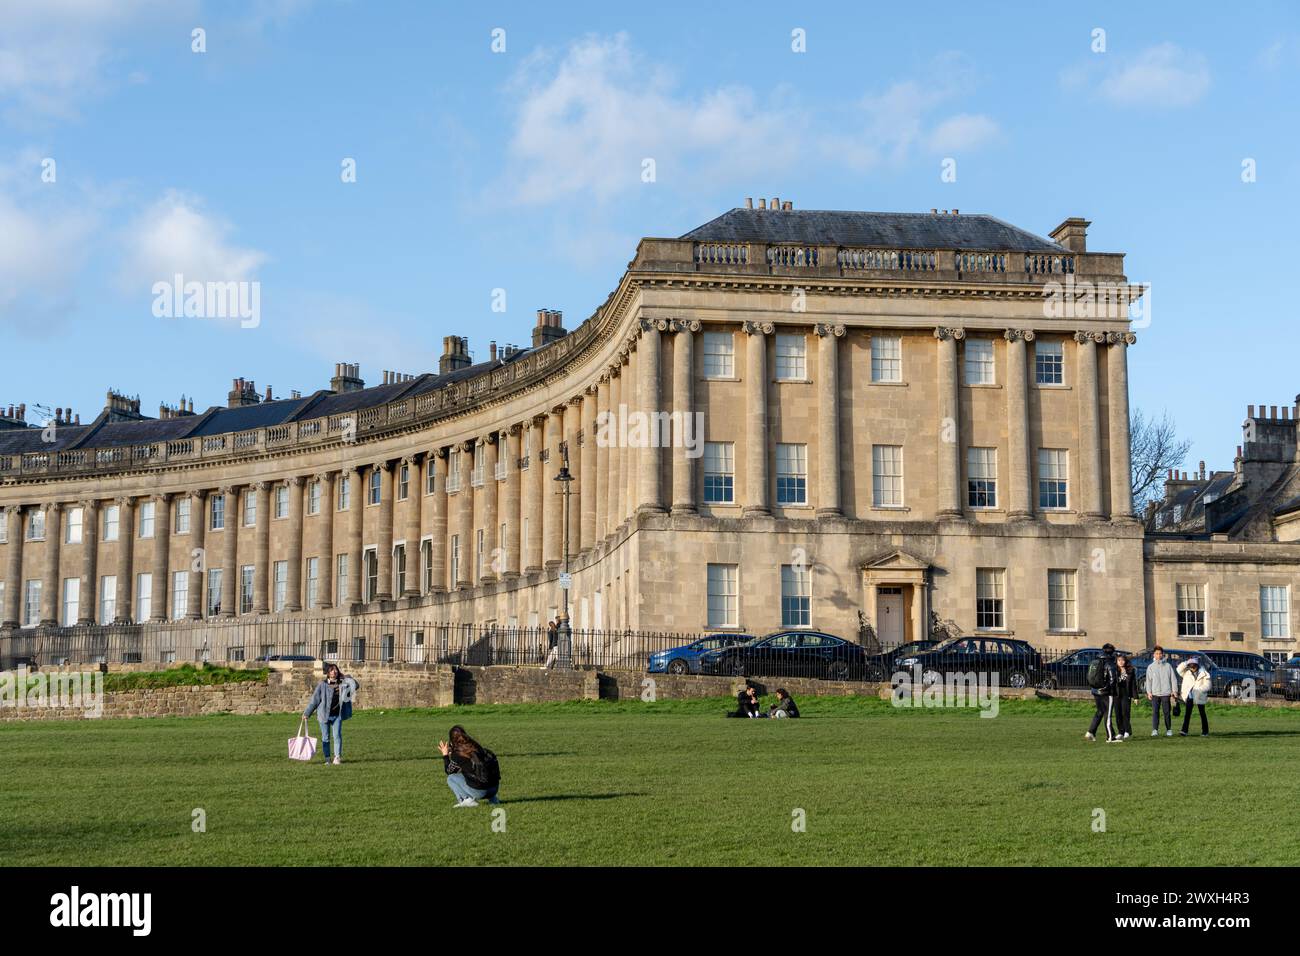 The Royal Crescent - Grade I Listed terrace houses in the city of Bath, Somerset, UK, a popular destination for tourists. Stock Photo